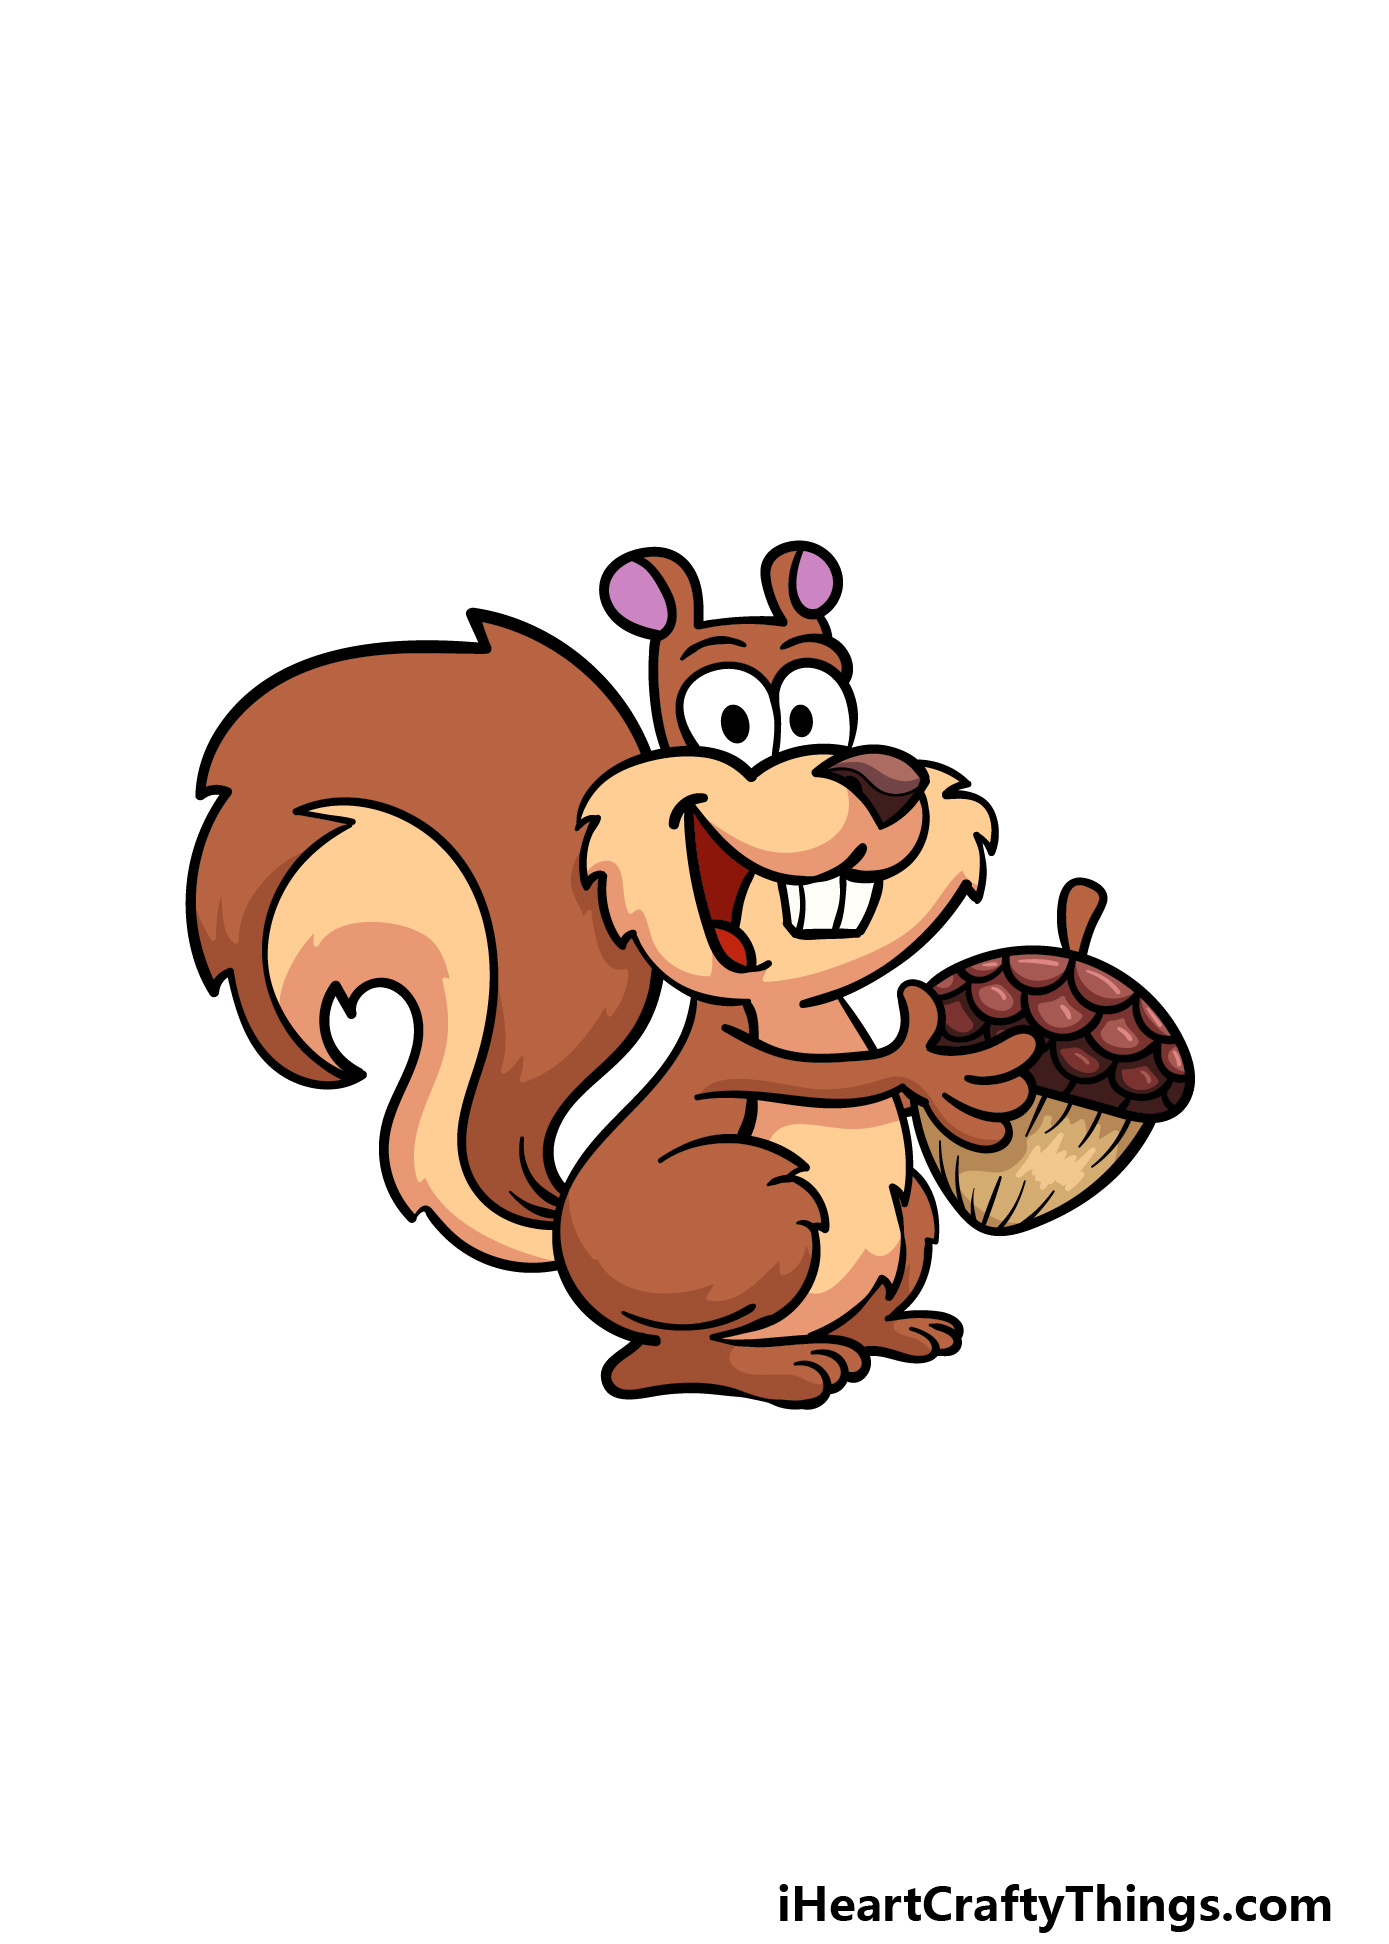 Cartoon Squirrel Drawing - How To Draw A Cartoon Squirrel Step By Step